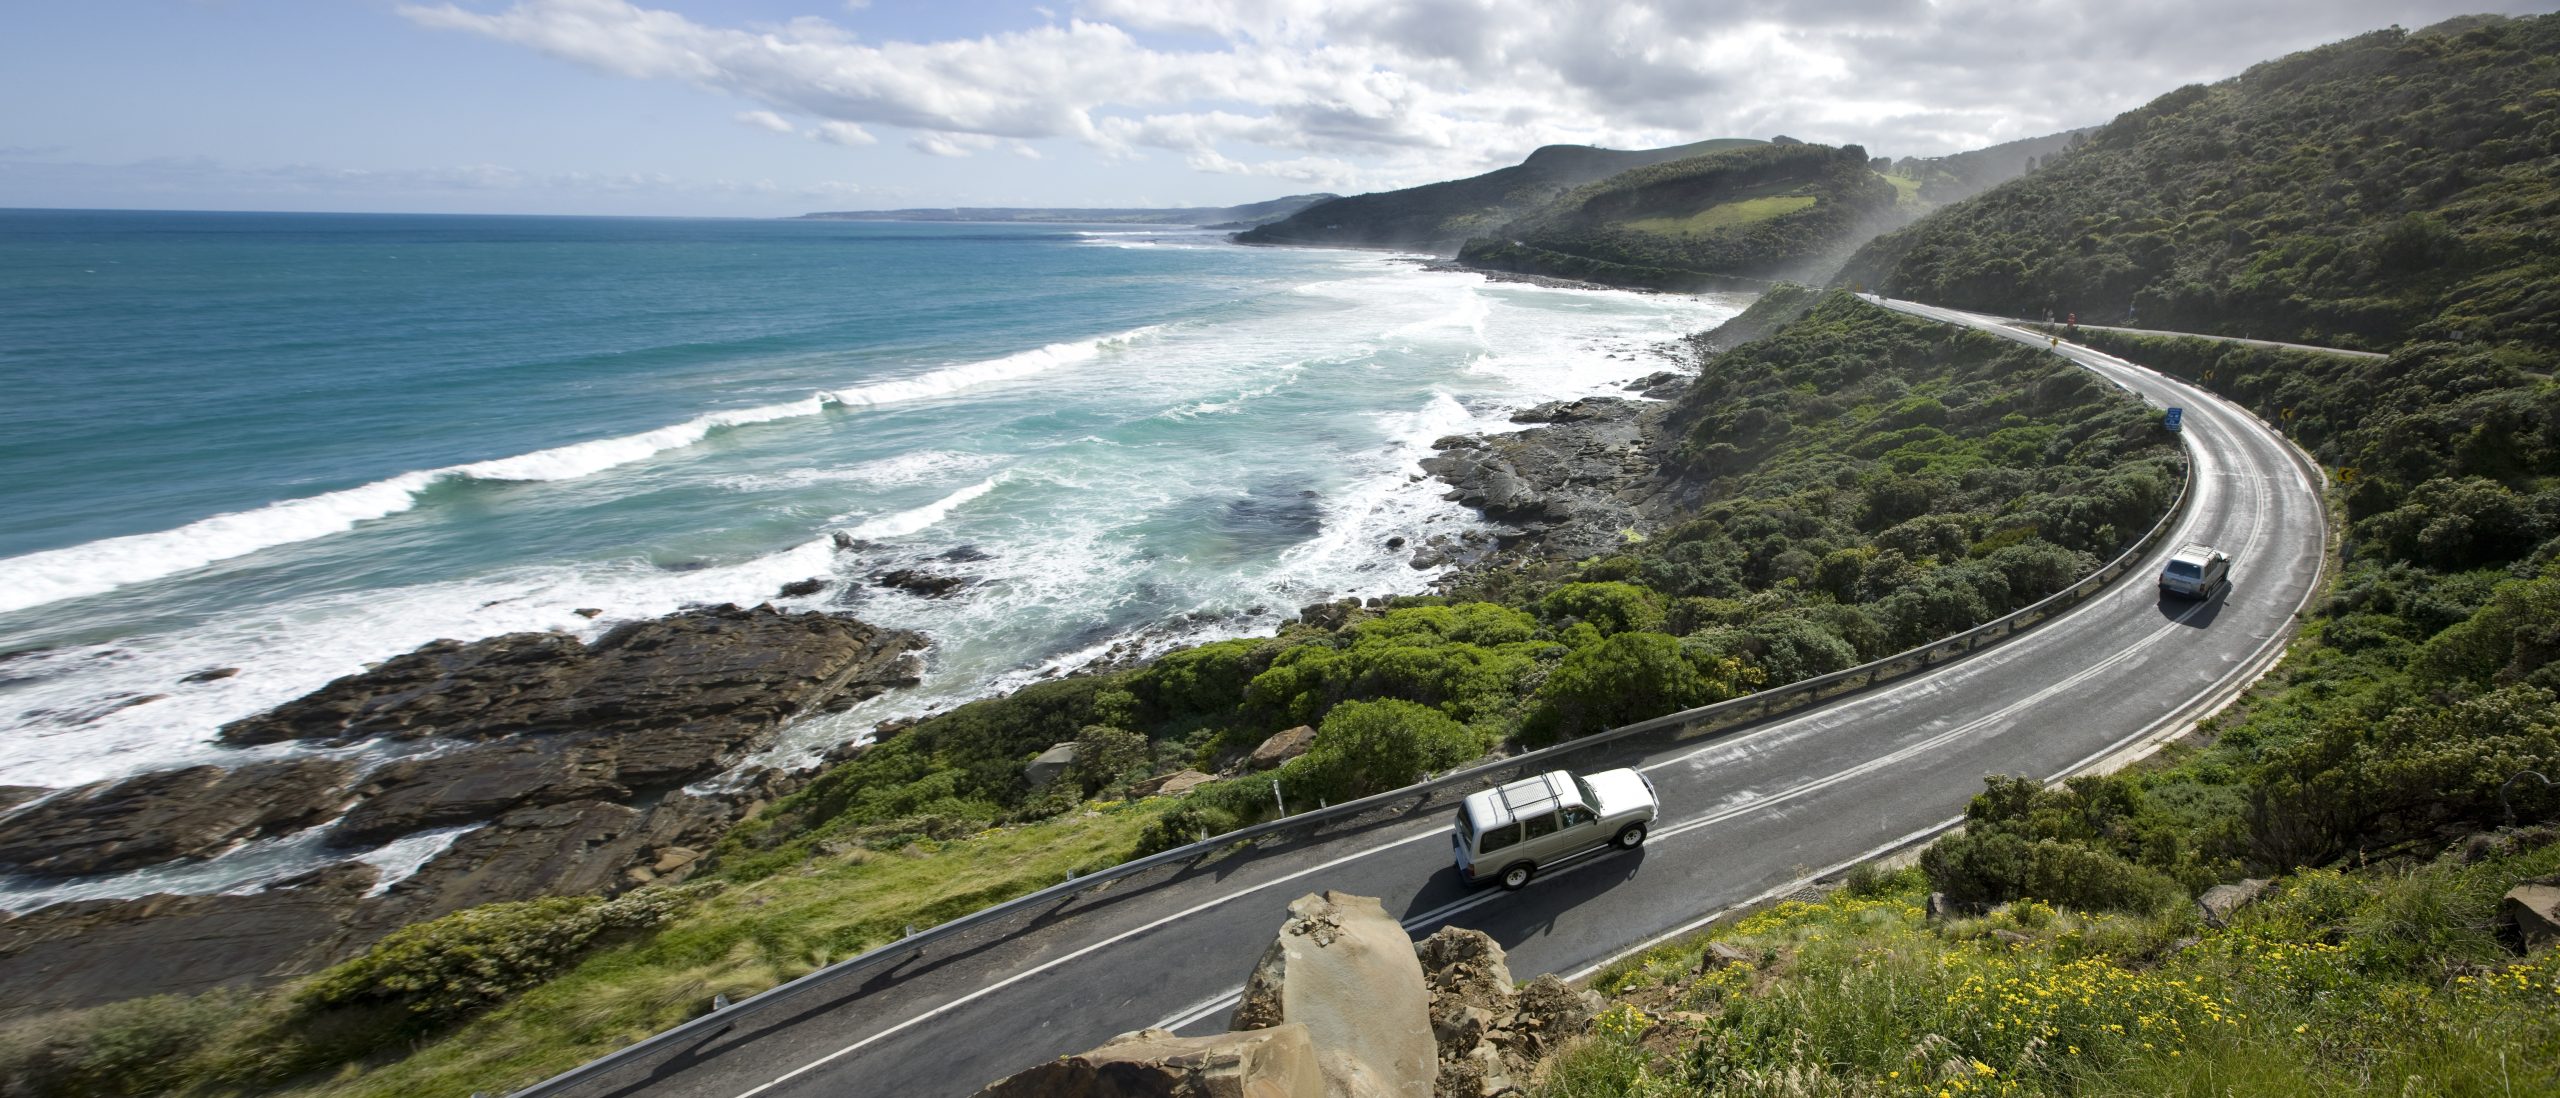 Great Otway National Park, with the winding road along the ocean shoreline.